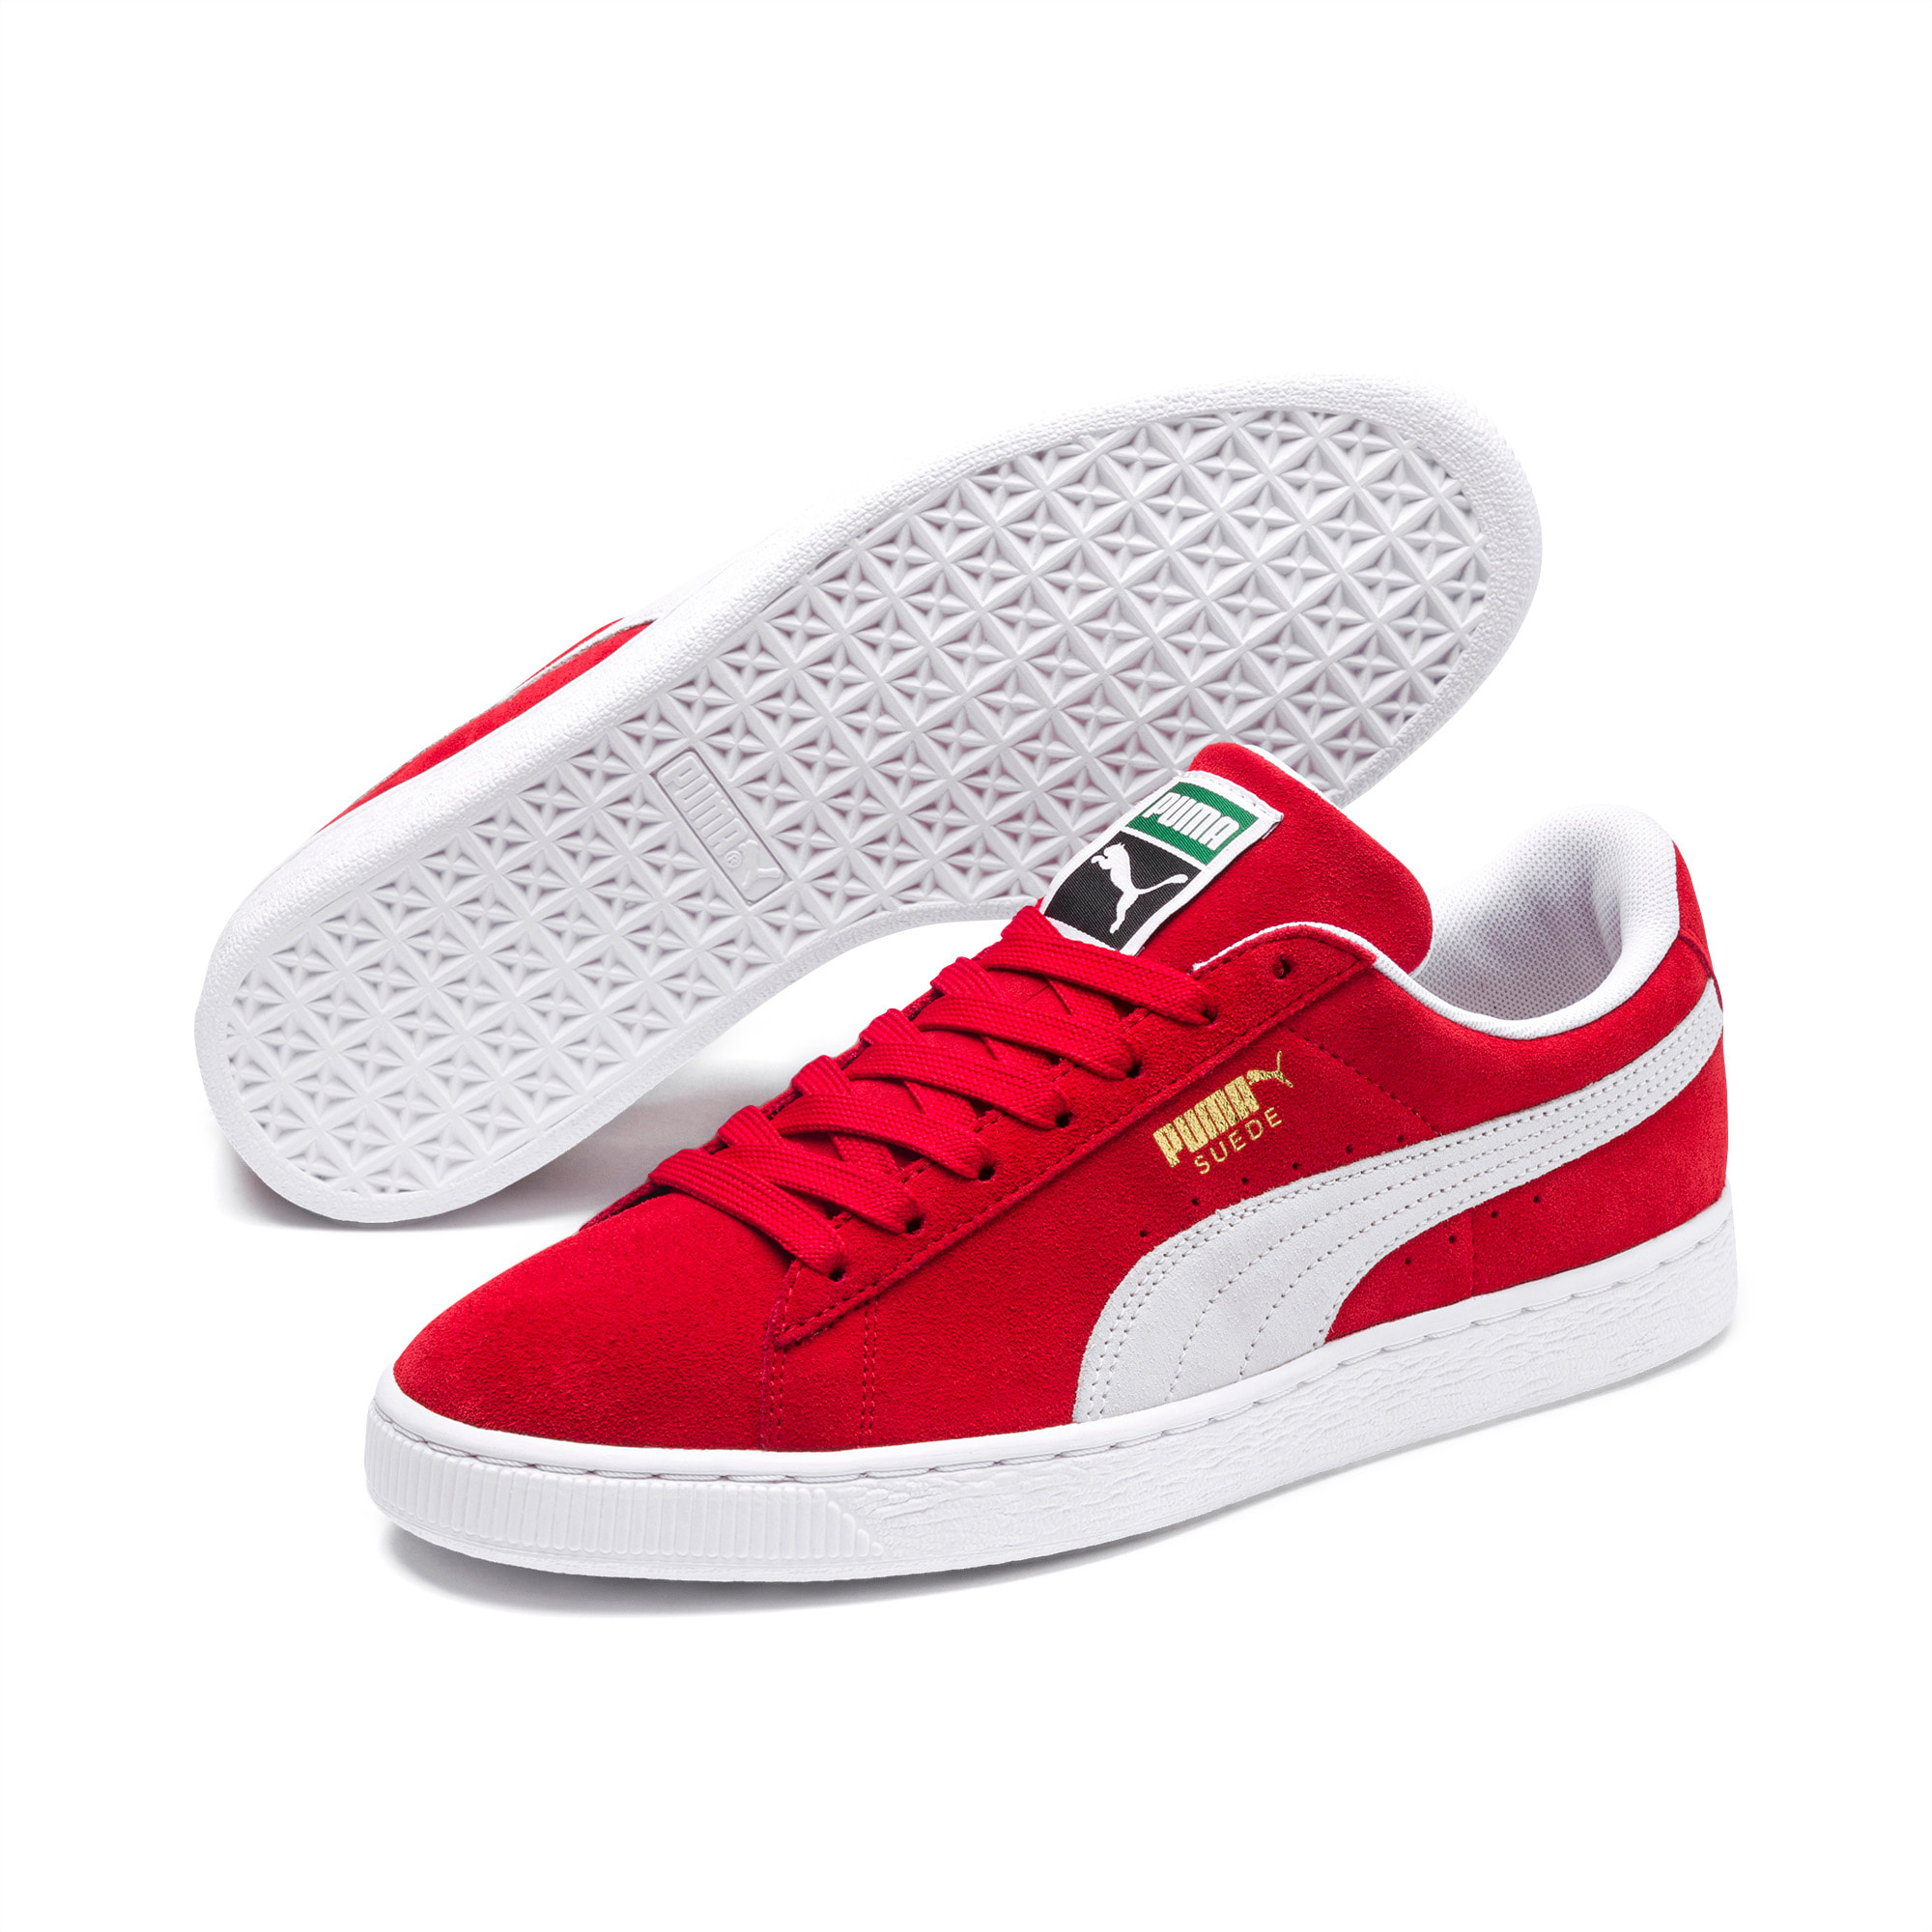 puma red suede sneakers